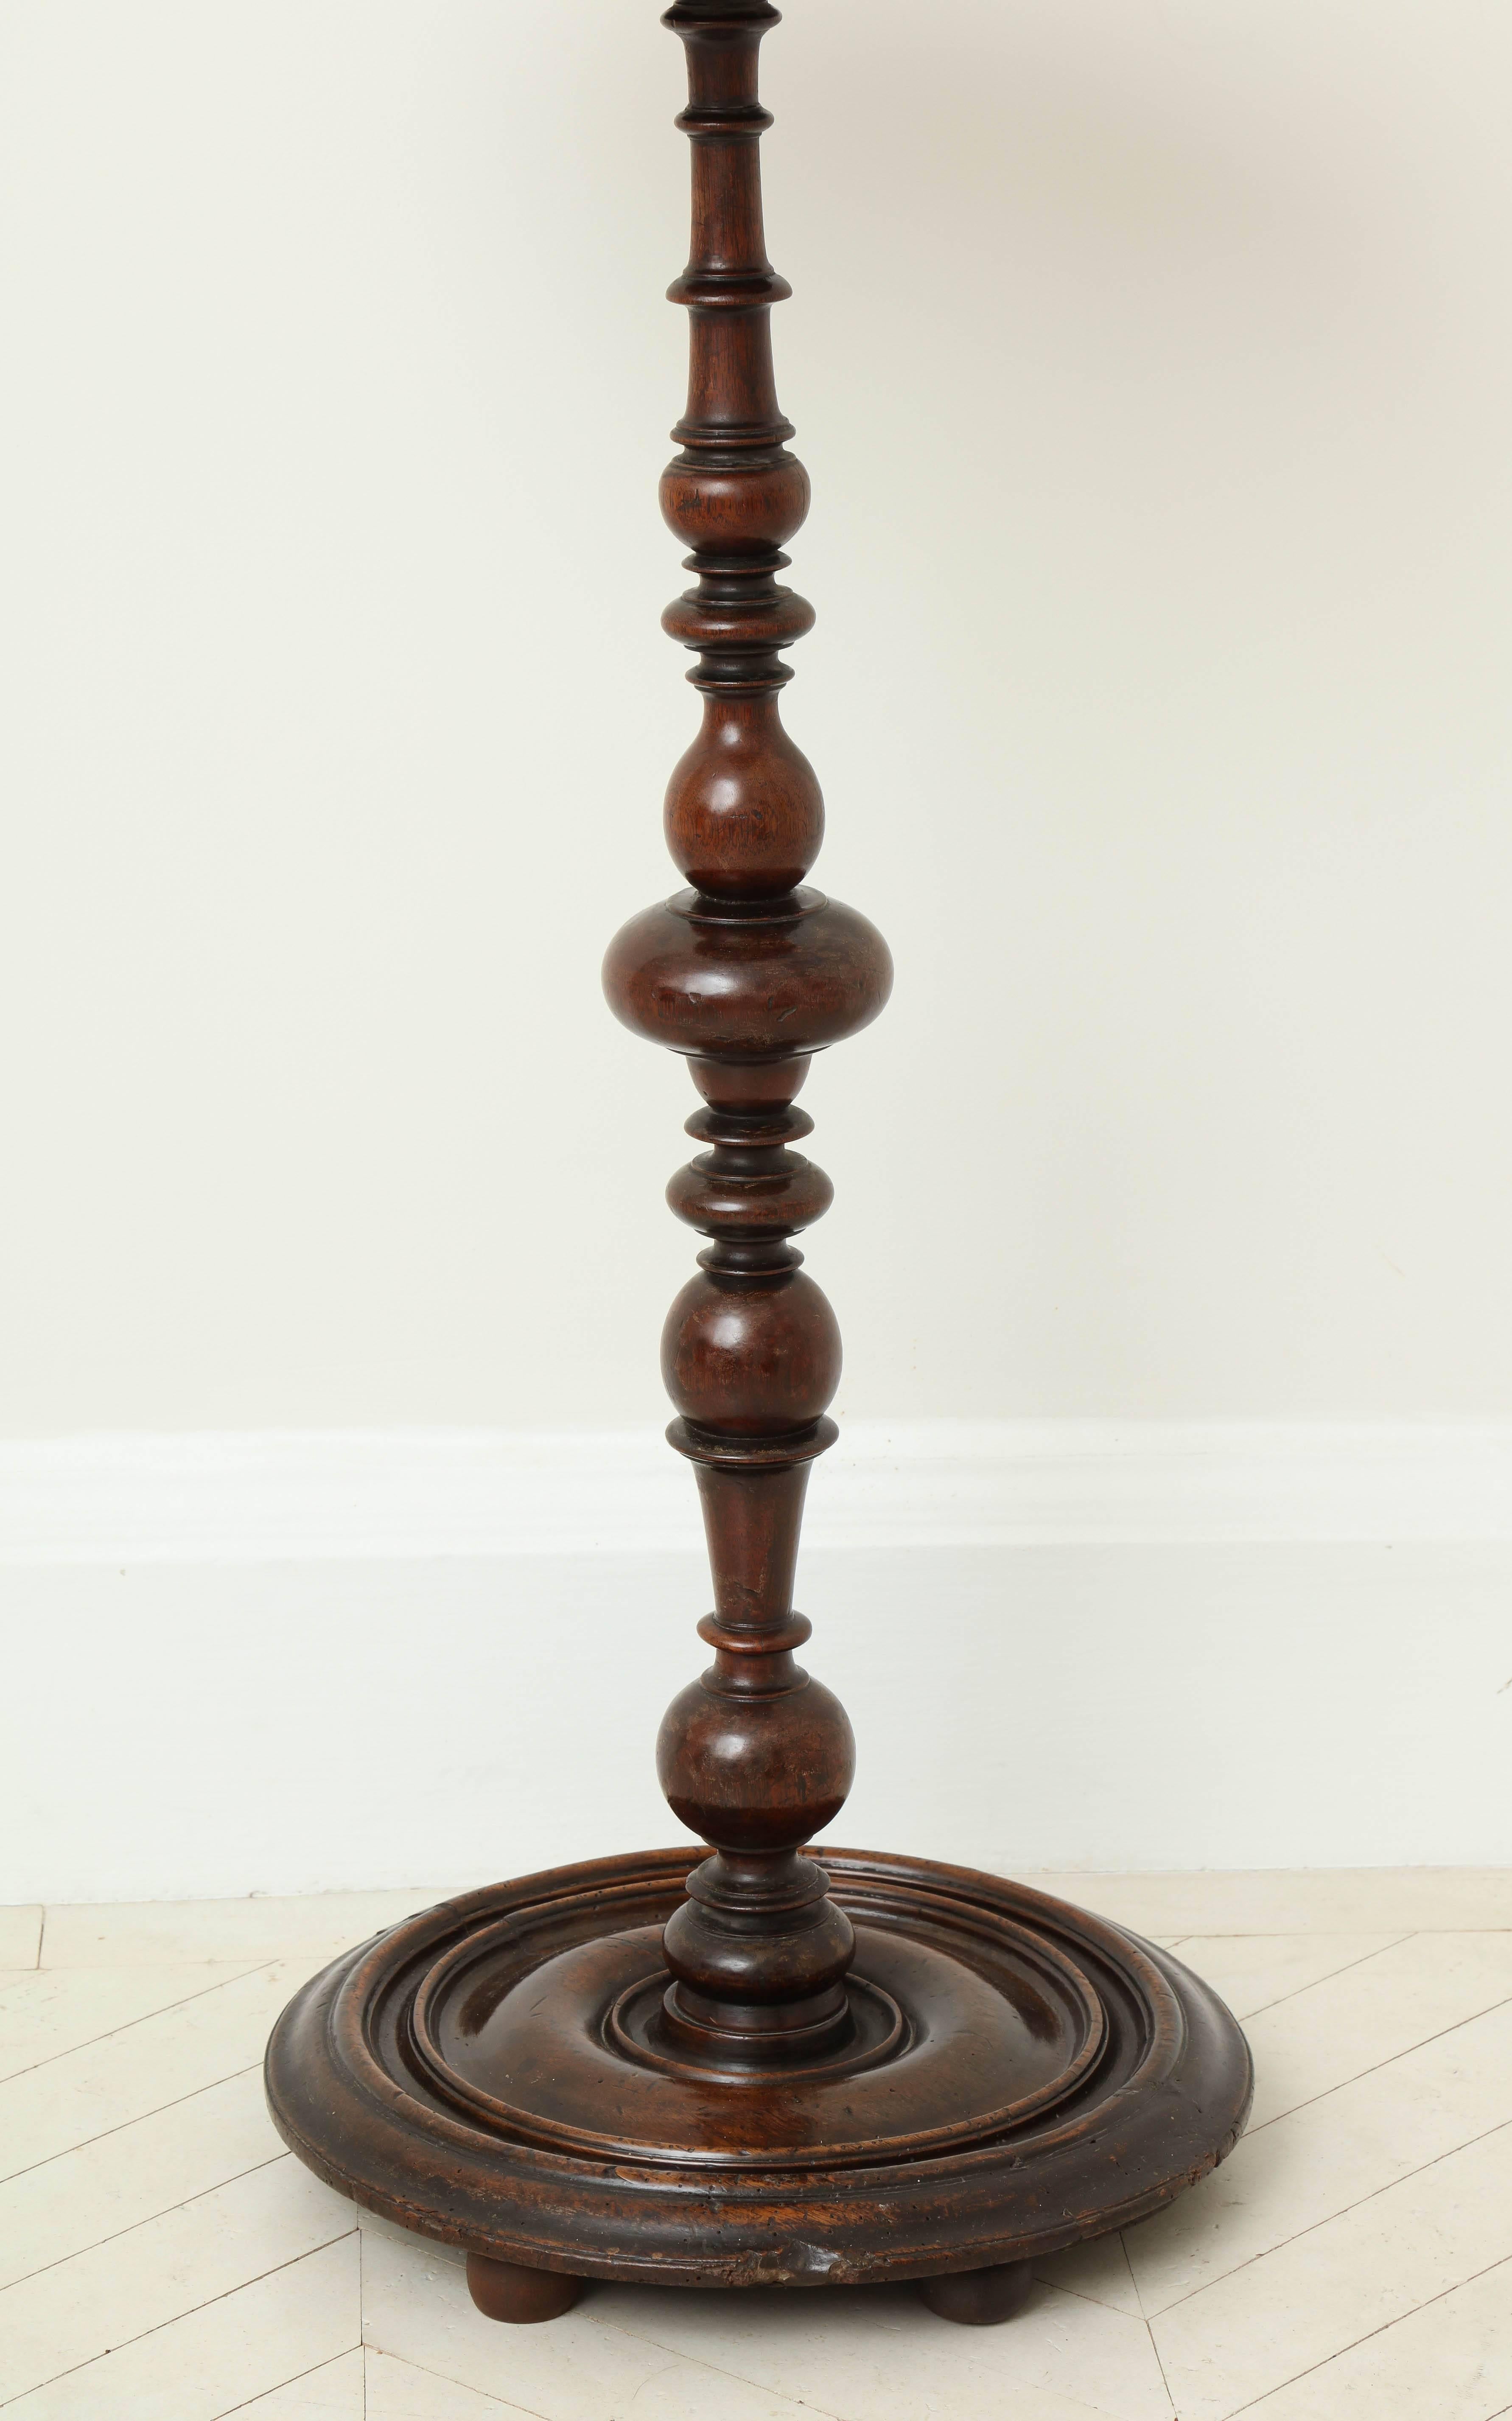 An early 18th century Italian Baroque turned walnut pedestal table with dished top and conforming round base with lovely patina.